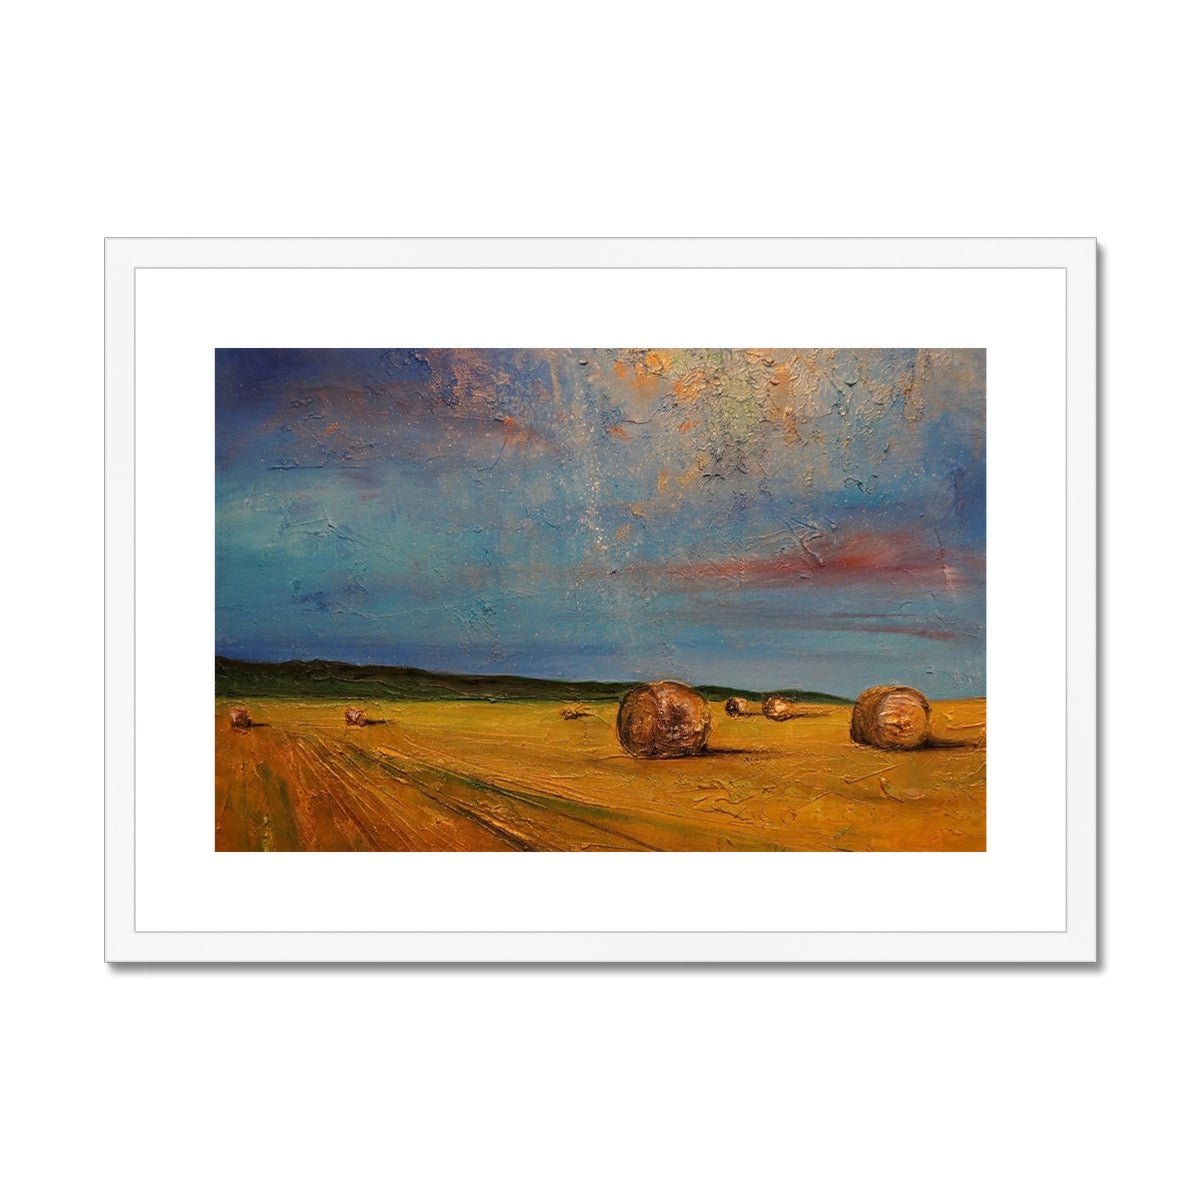 Hay Bales Painting | Framed & Mounted Prints From Scotland-Framed & Mounted Prints-Scottish Highlands & Lowlands Art Gallery-A2 Landscape-White Frame-Paintings, Prints, Homeware, Art Gifts From Scotland By Scottish Artist Kevin Hunter